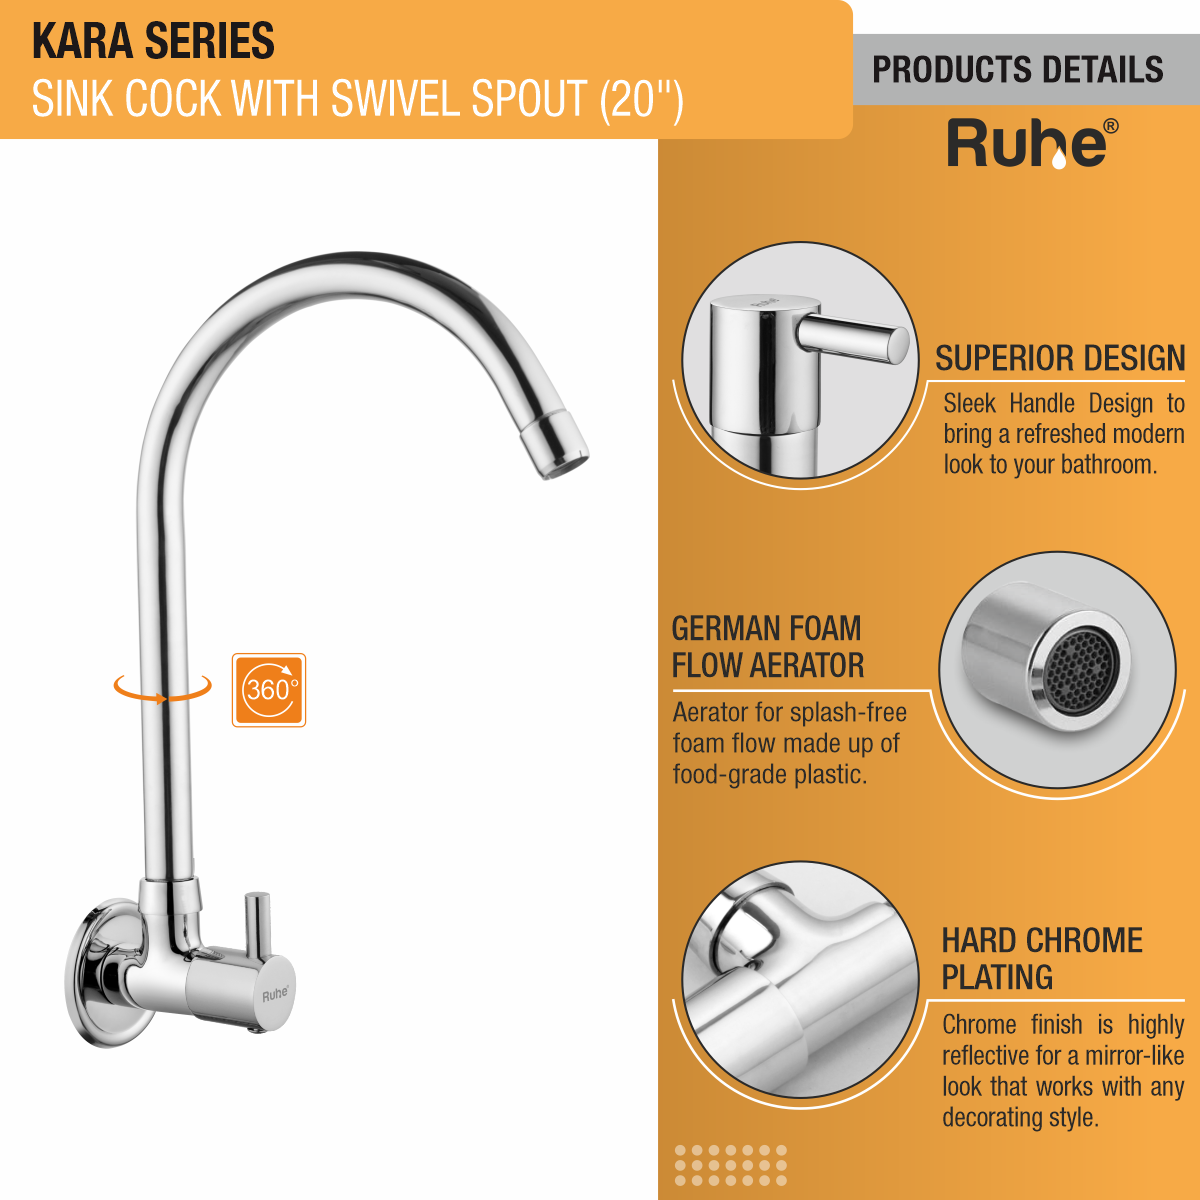 Kara Sink Tap with Large (20 inches) Round Swivel Spout Faucet product details